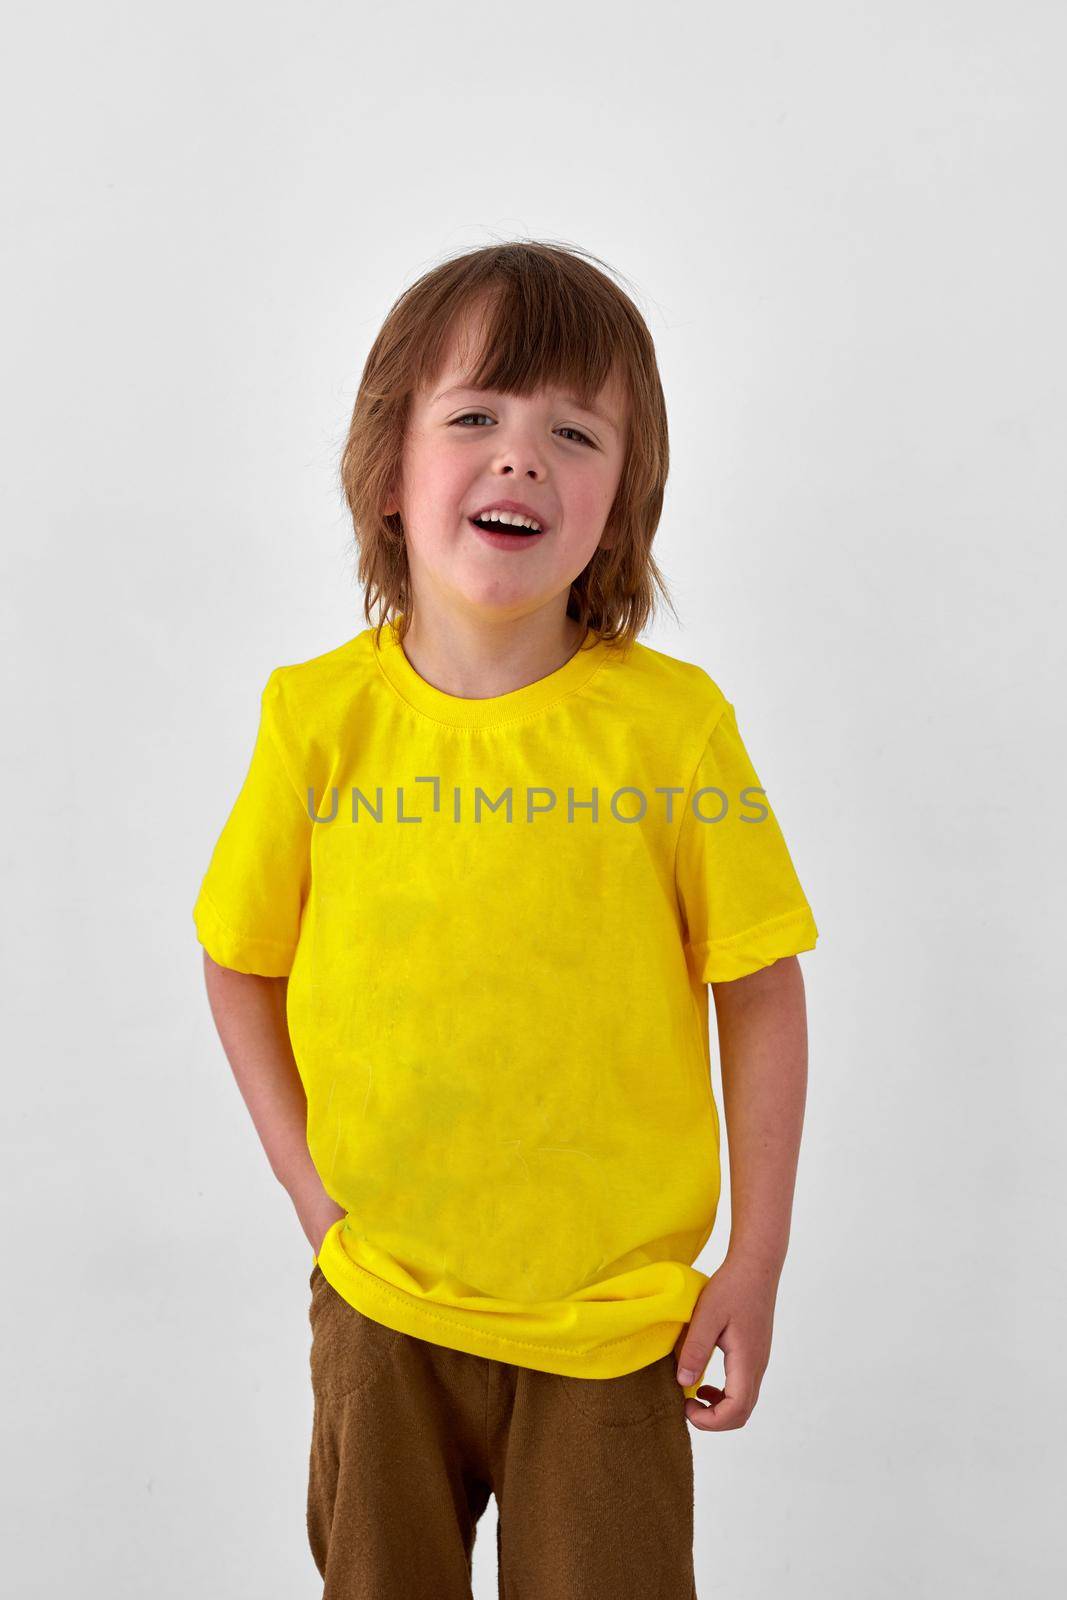 Positive young boy in casual yellow outfit standing on white background by Demkat